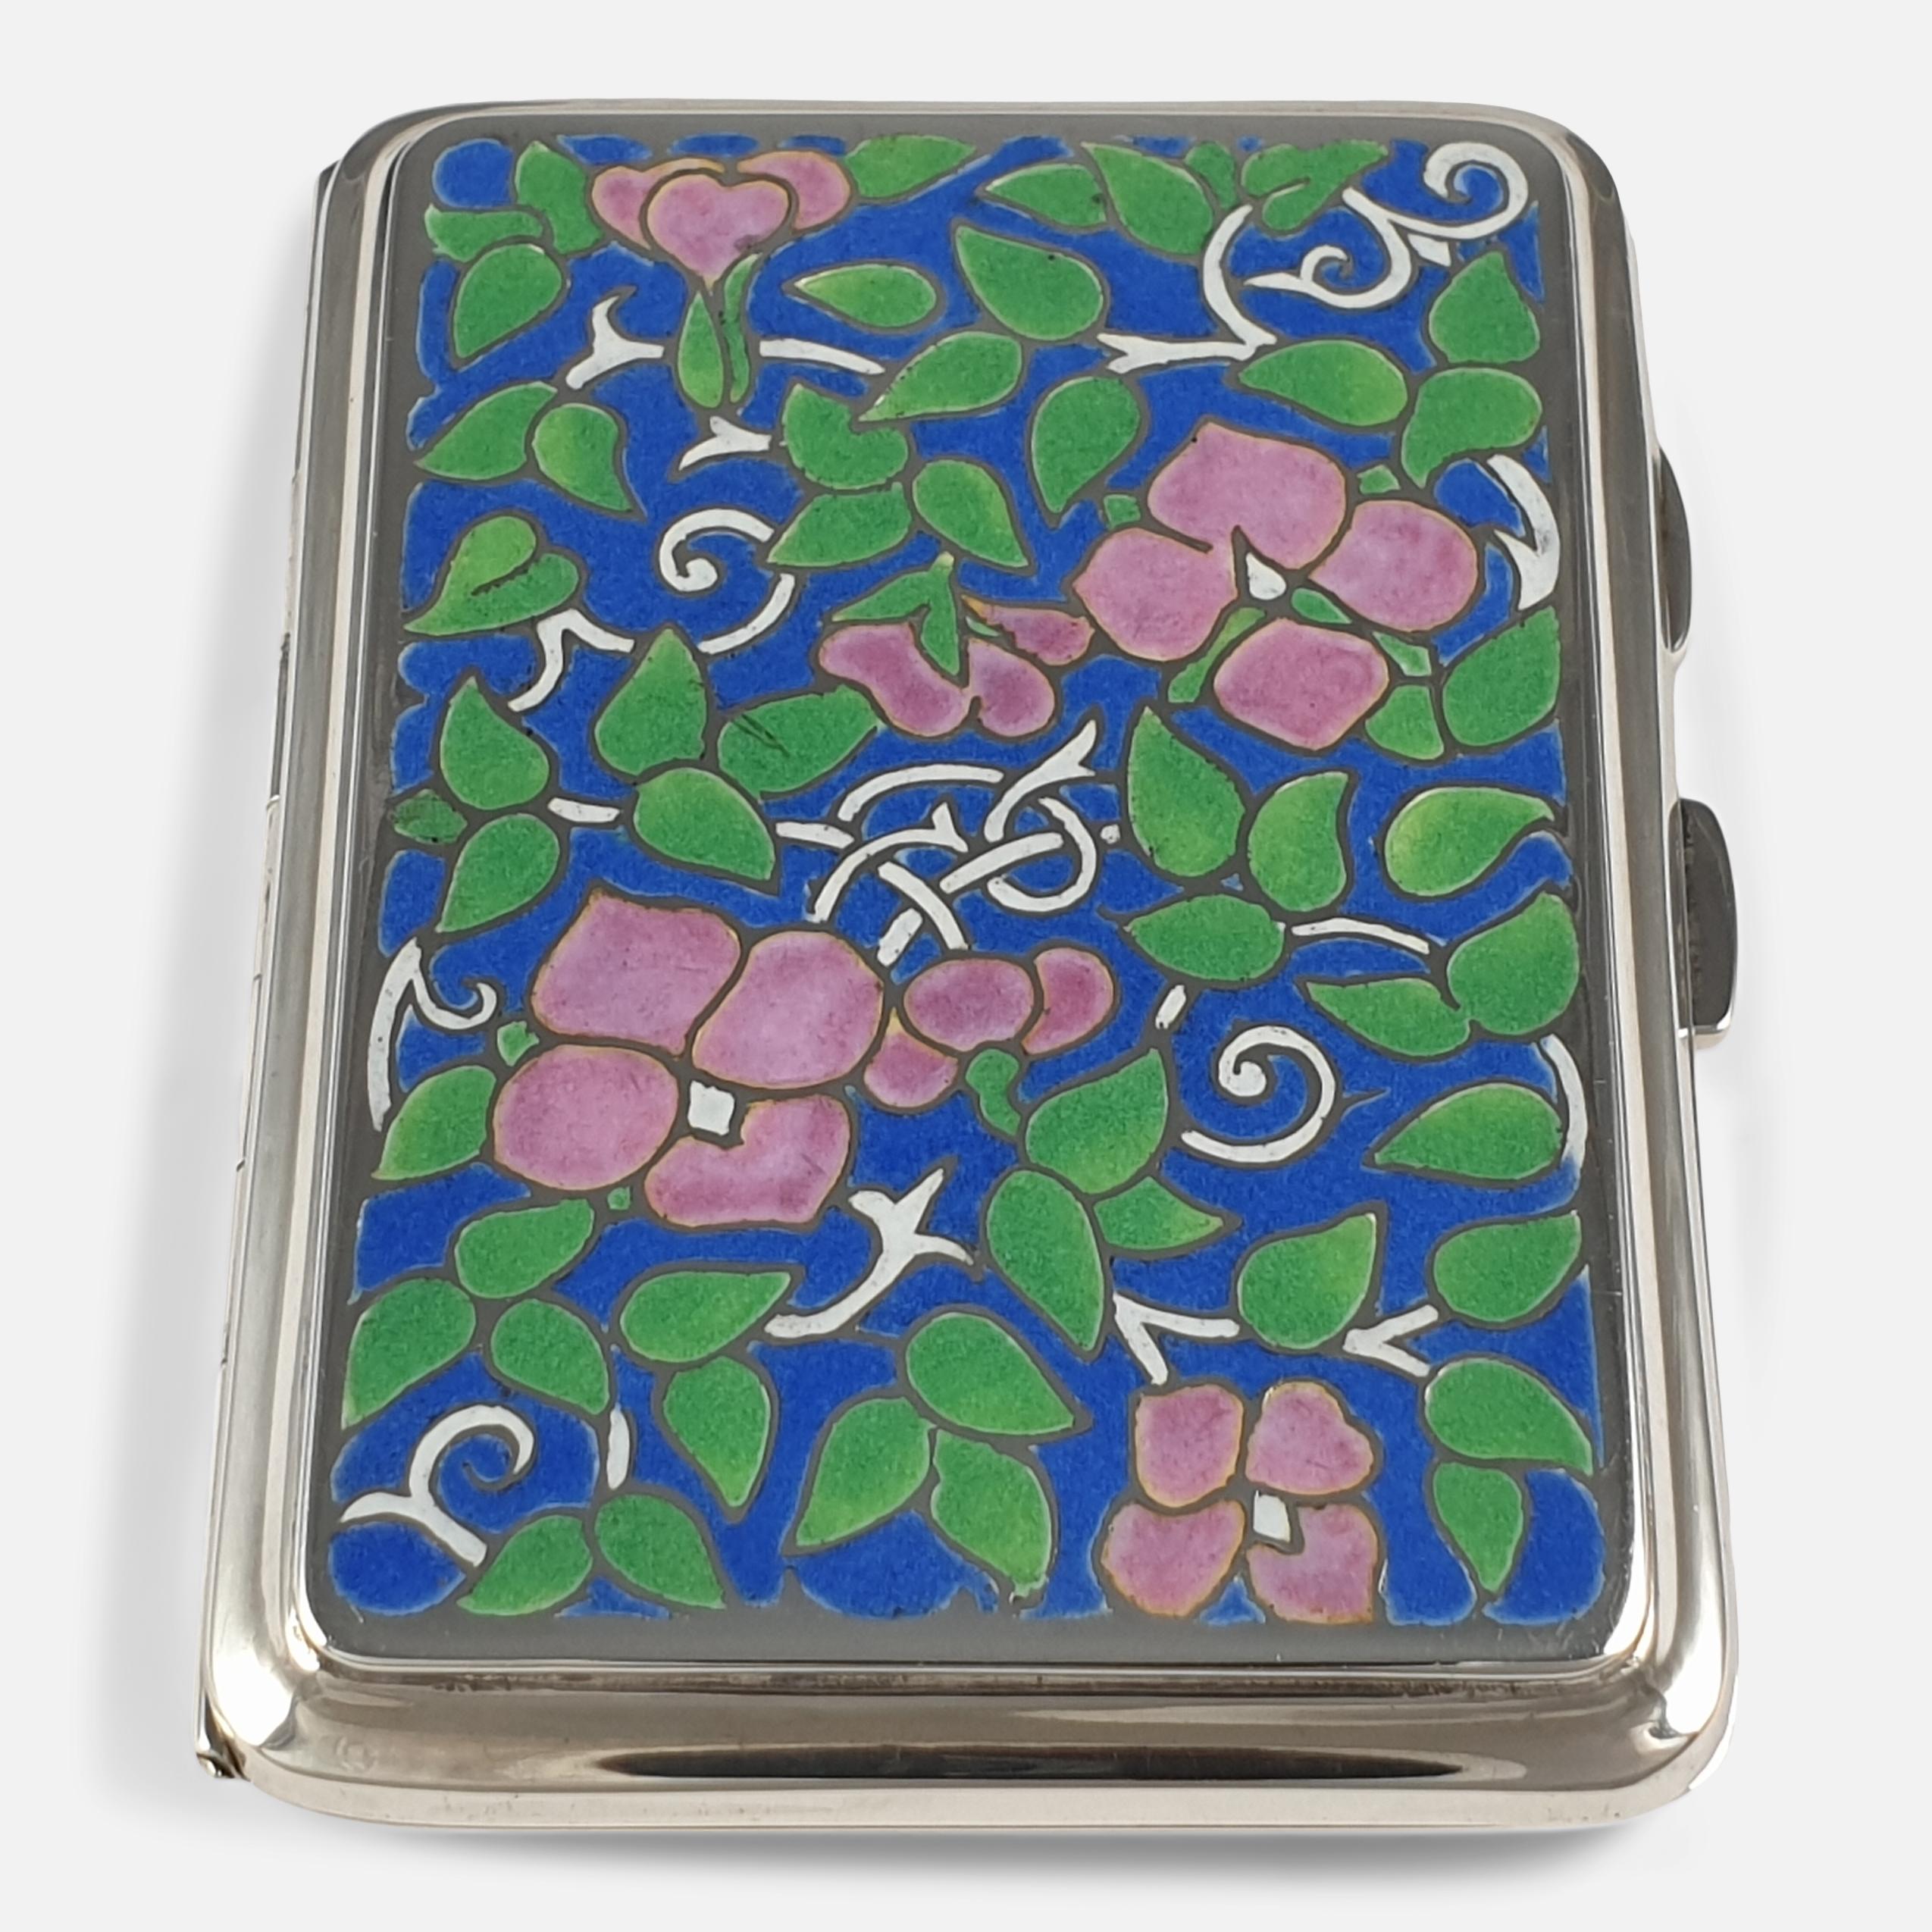 An Arts & Crafts style sterling silver and enamel cigarette case by Bernard Instone, Birmingham, 1930. The cigarette case is of rectangular form, the front is enameled with trailing green leaves and pink flowers on white stem, and a blue